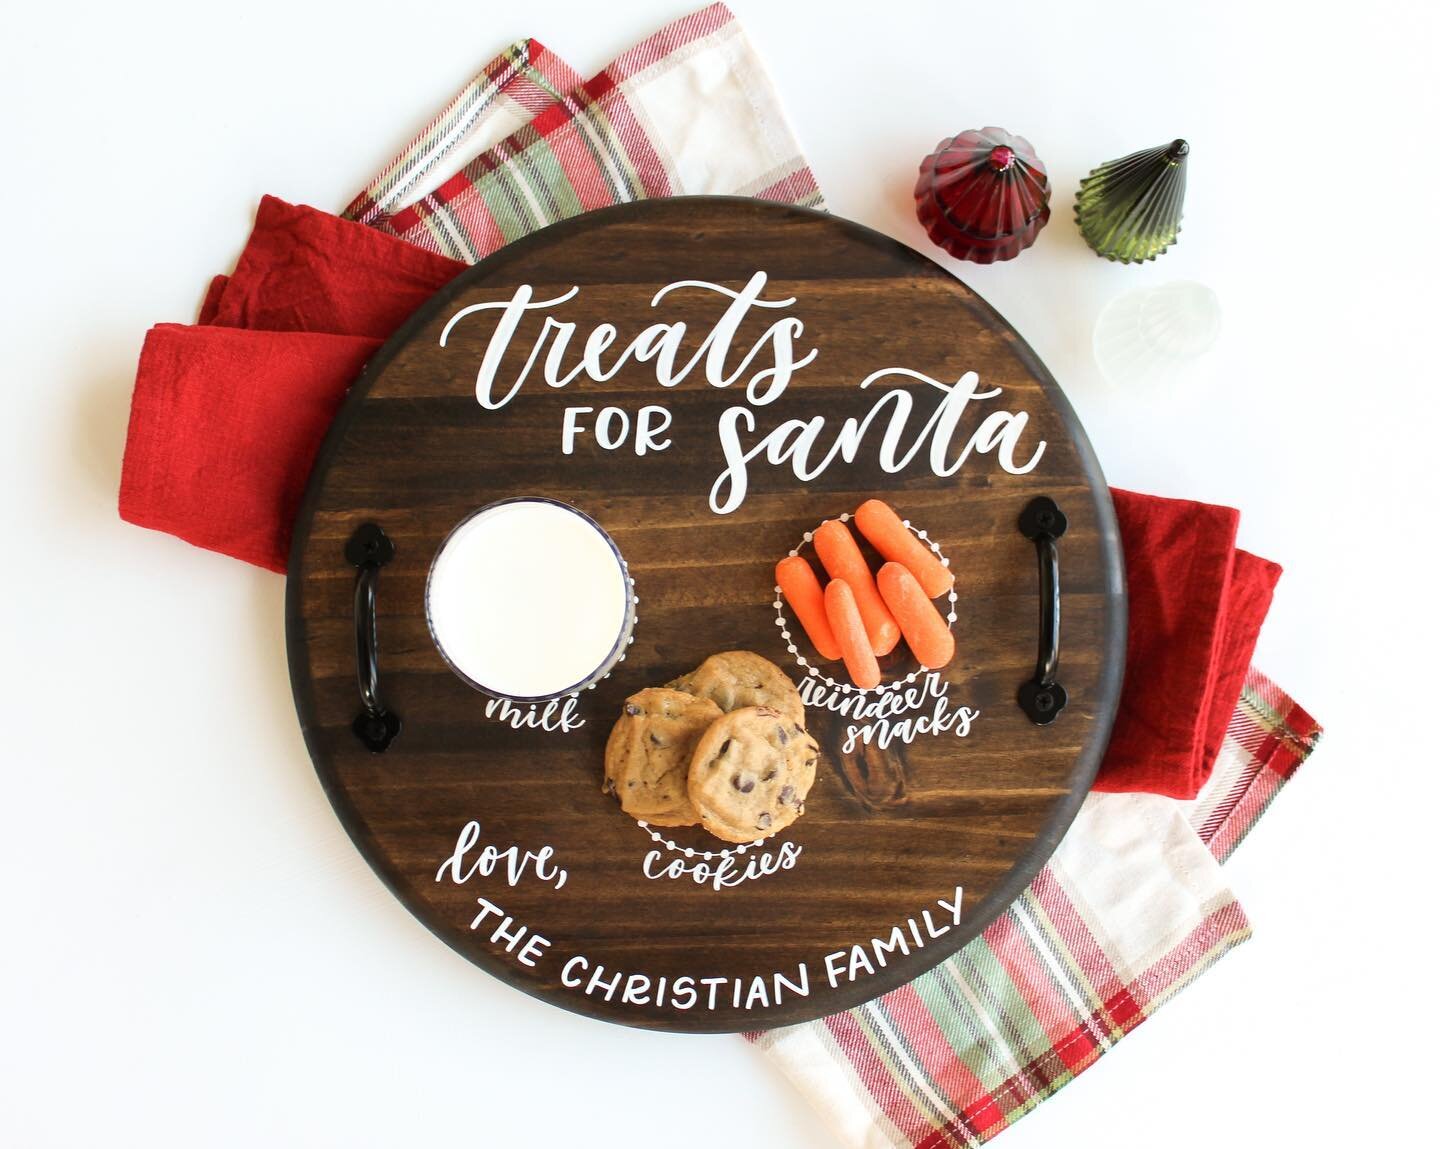 Day 4 - Personalized Santa Trays! Don&rsquo;t forget to leave Santa + his reindeer some goodies to keep them fueled for a long night of traveling the world!🌎🎅🏼

Each tray is hand lettered + personalized with your family name. They make the perfect